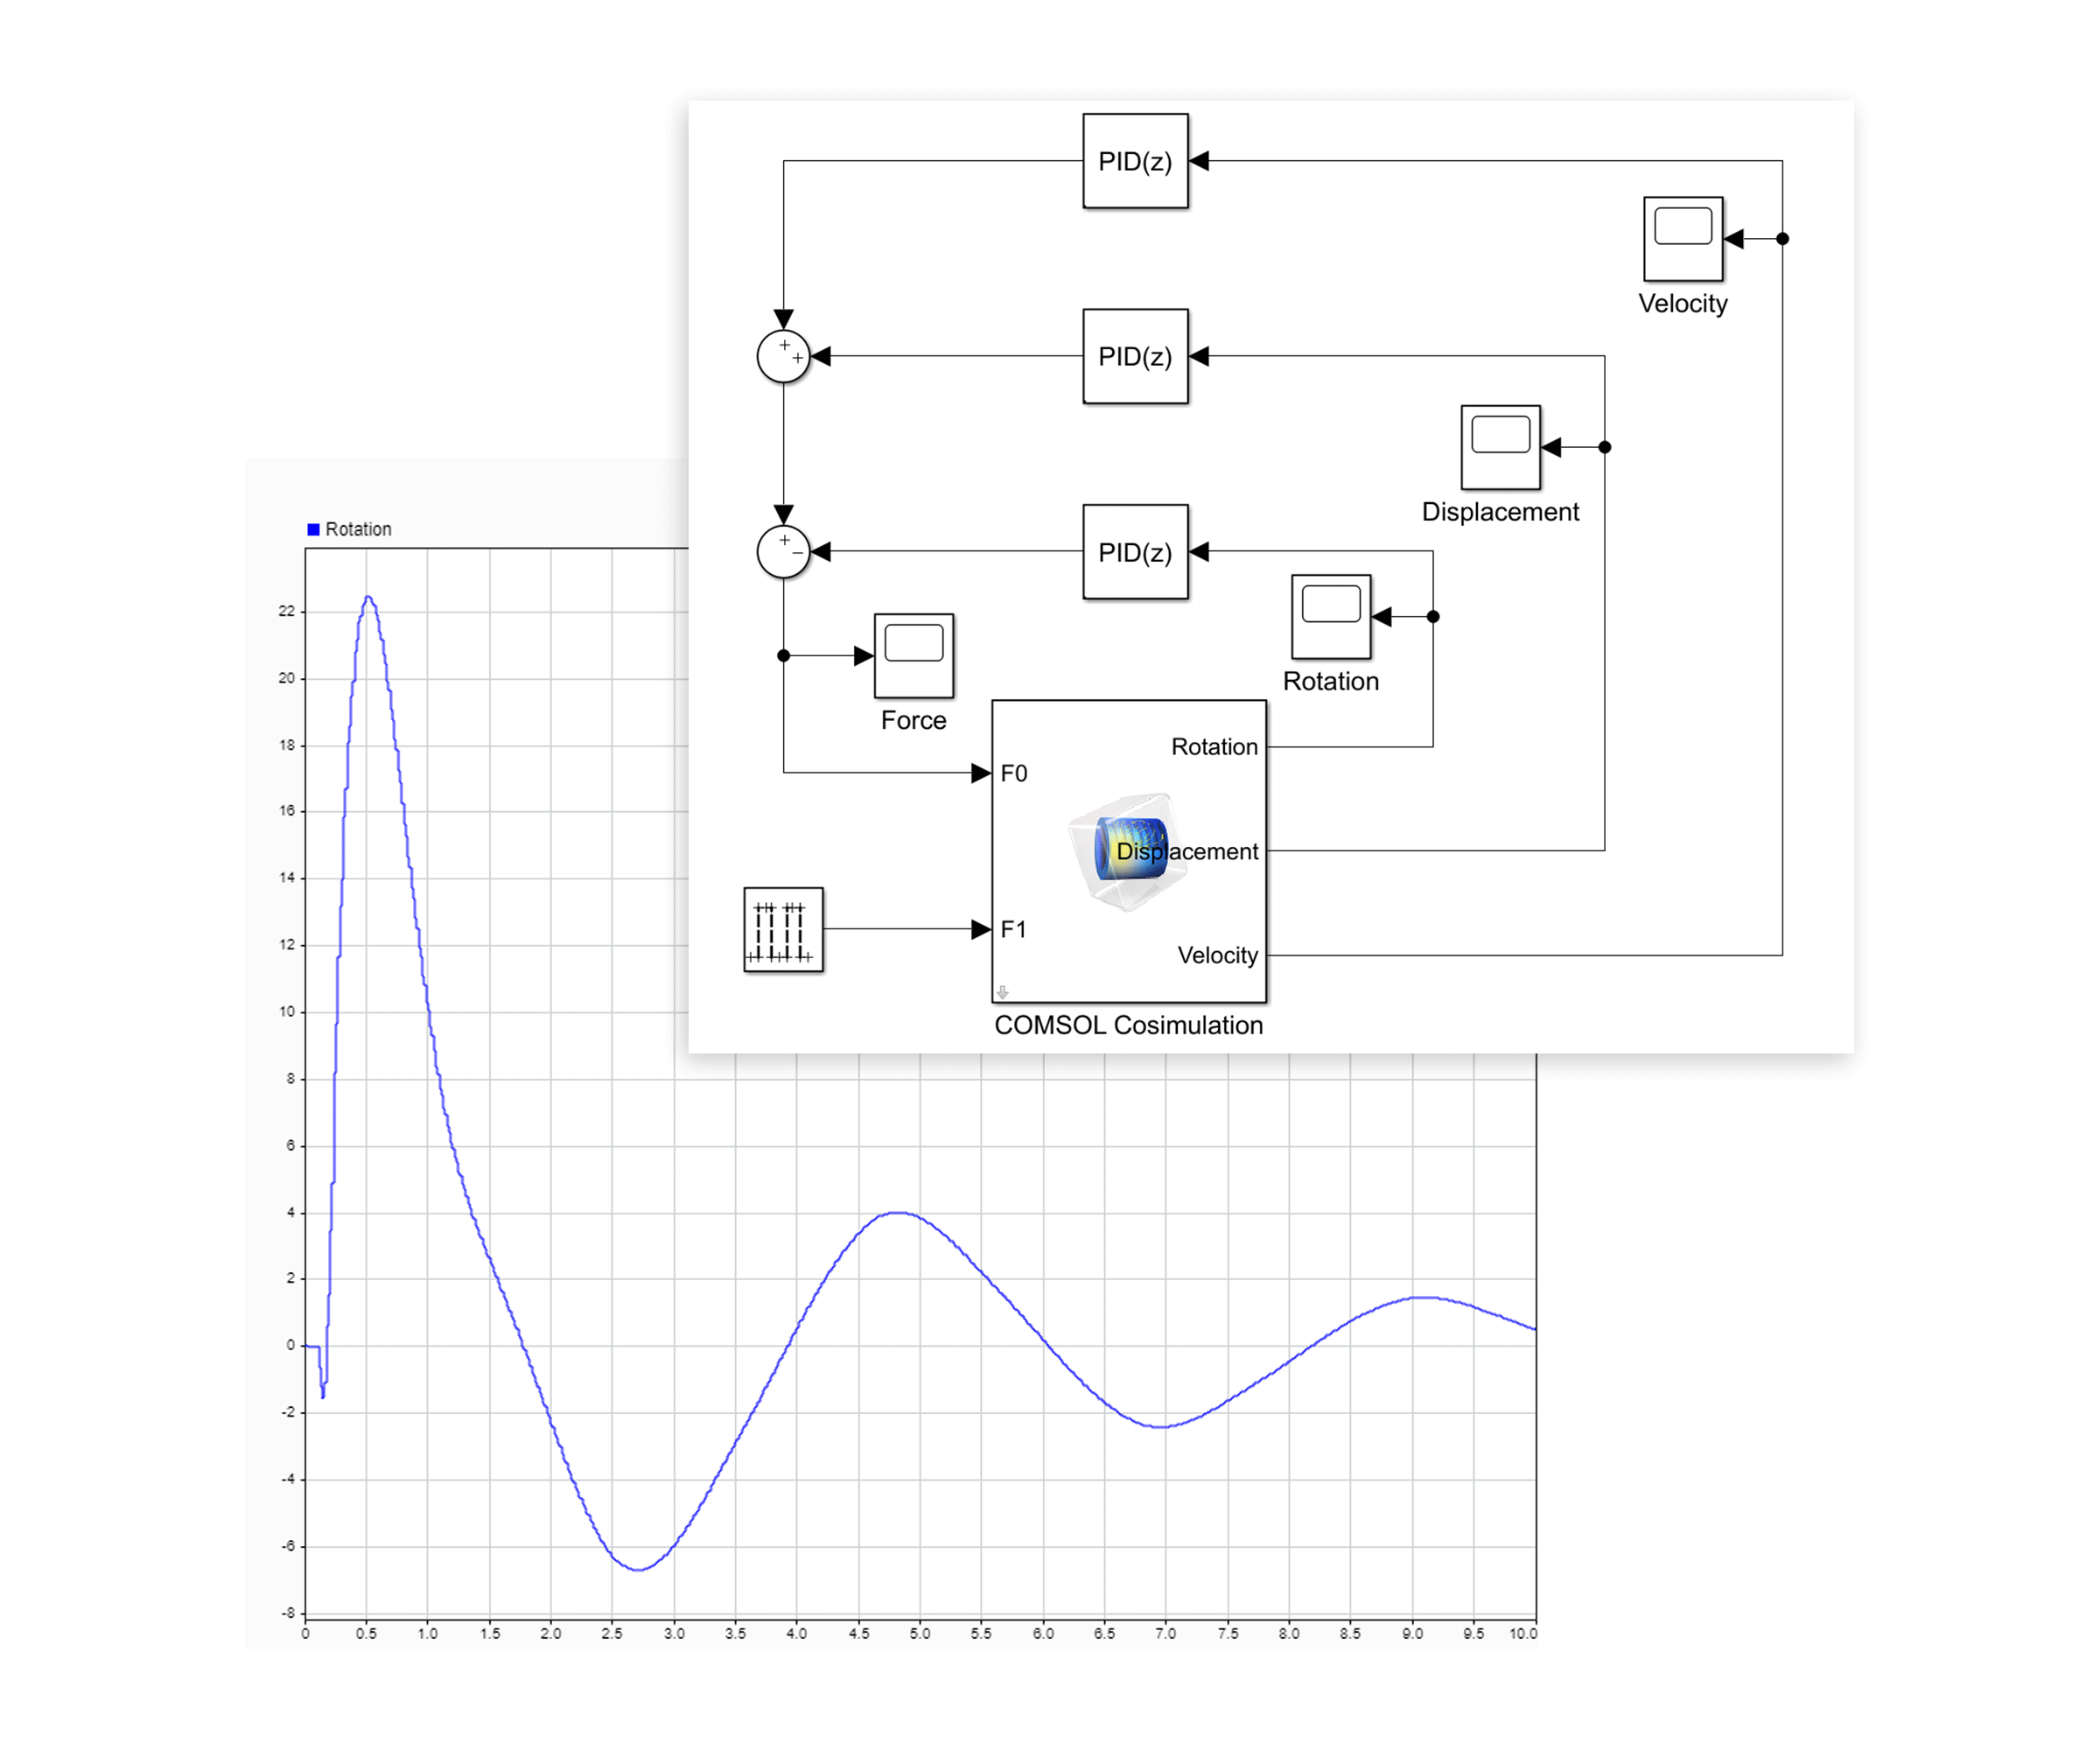 A LiveLink for Simulink cosimulation diagram in the foreground and a 1D plot in the background.